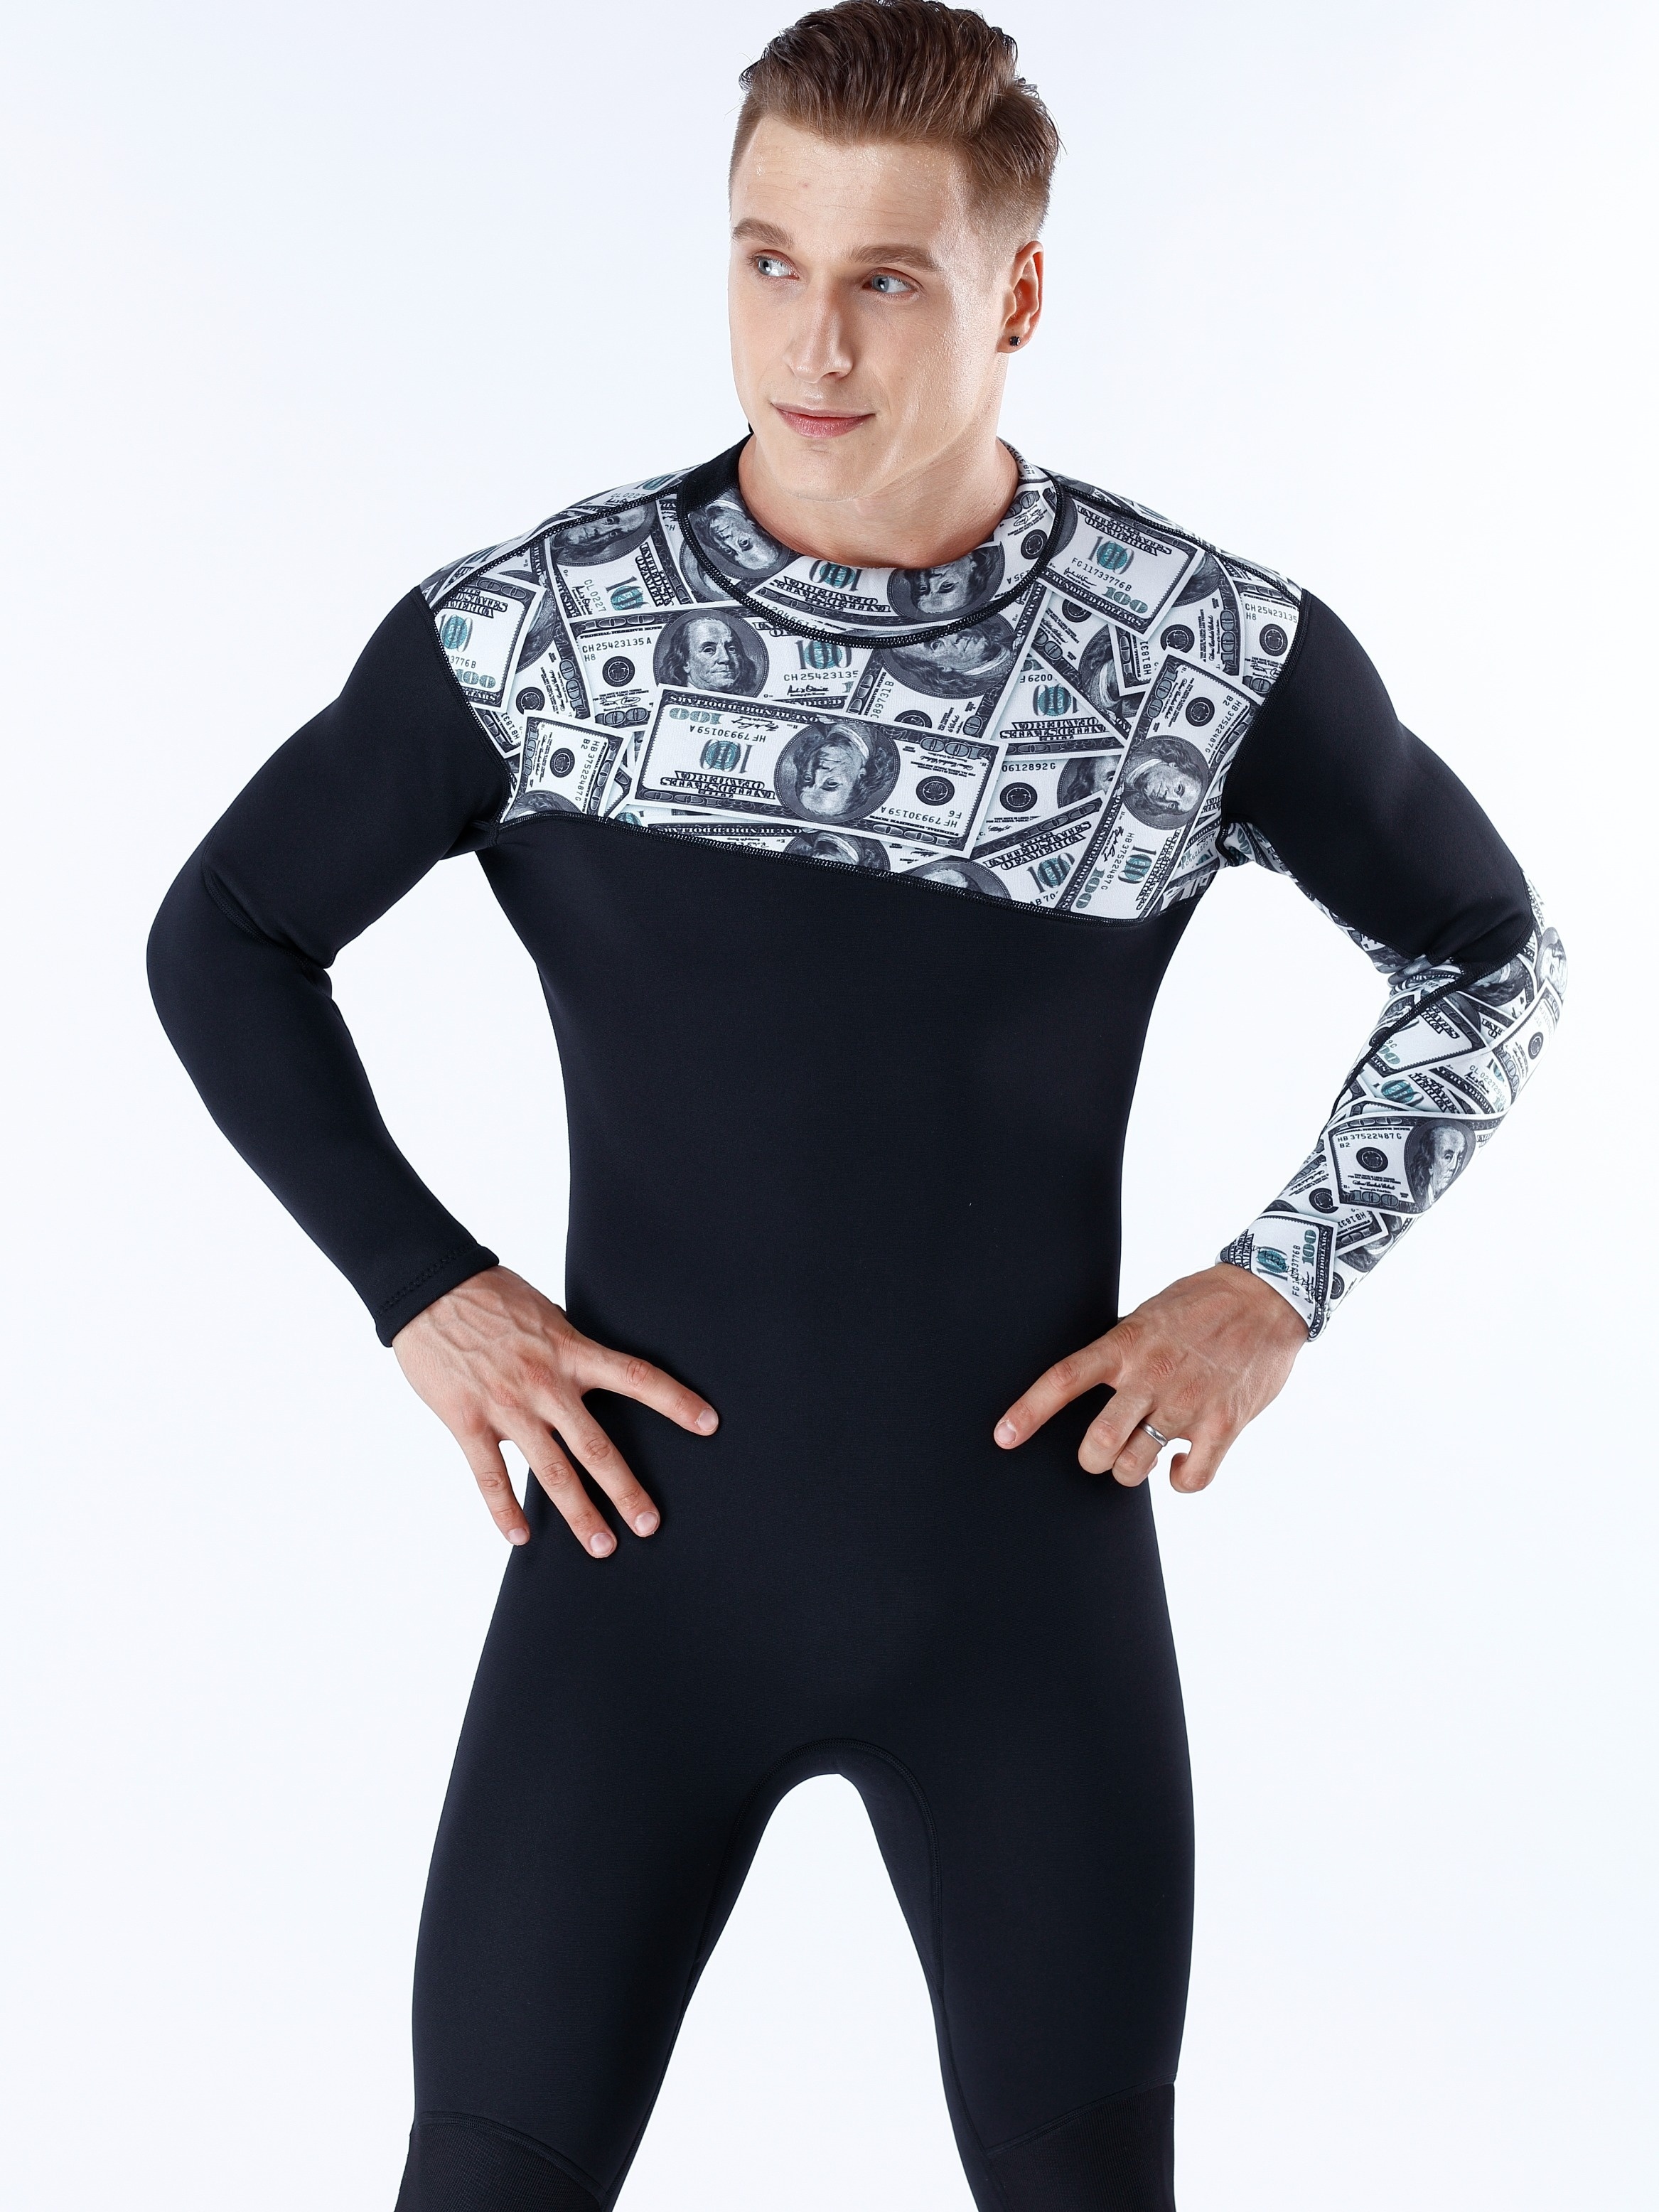 REALON Men's Professional 2mm Neoprene * Suit, Warm Onesie Back Zipper  Protection Wetsuit For Water Sports Snorkeling Swimming Surfing